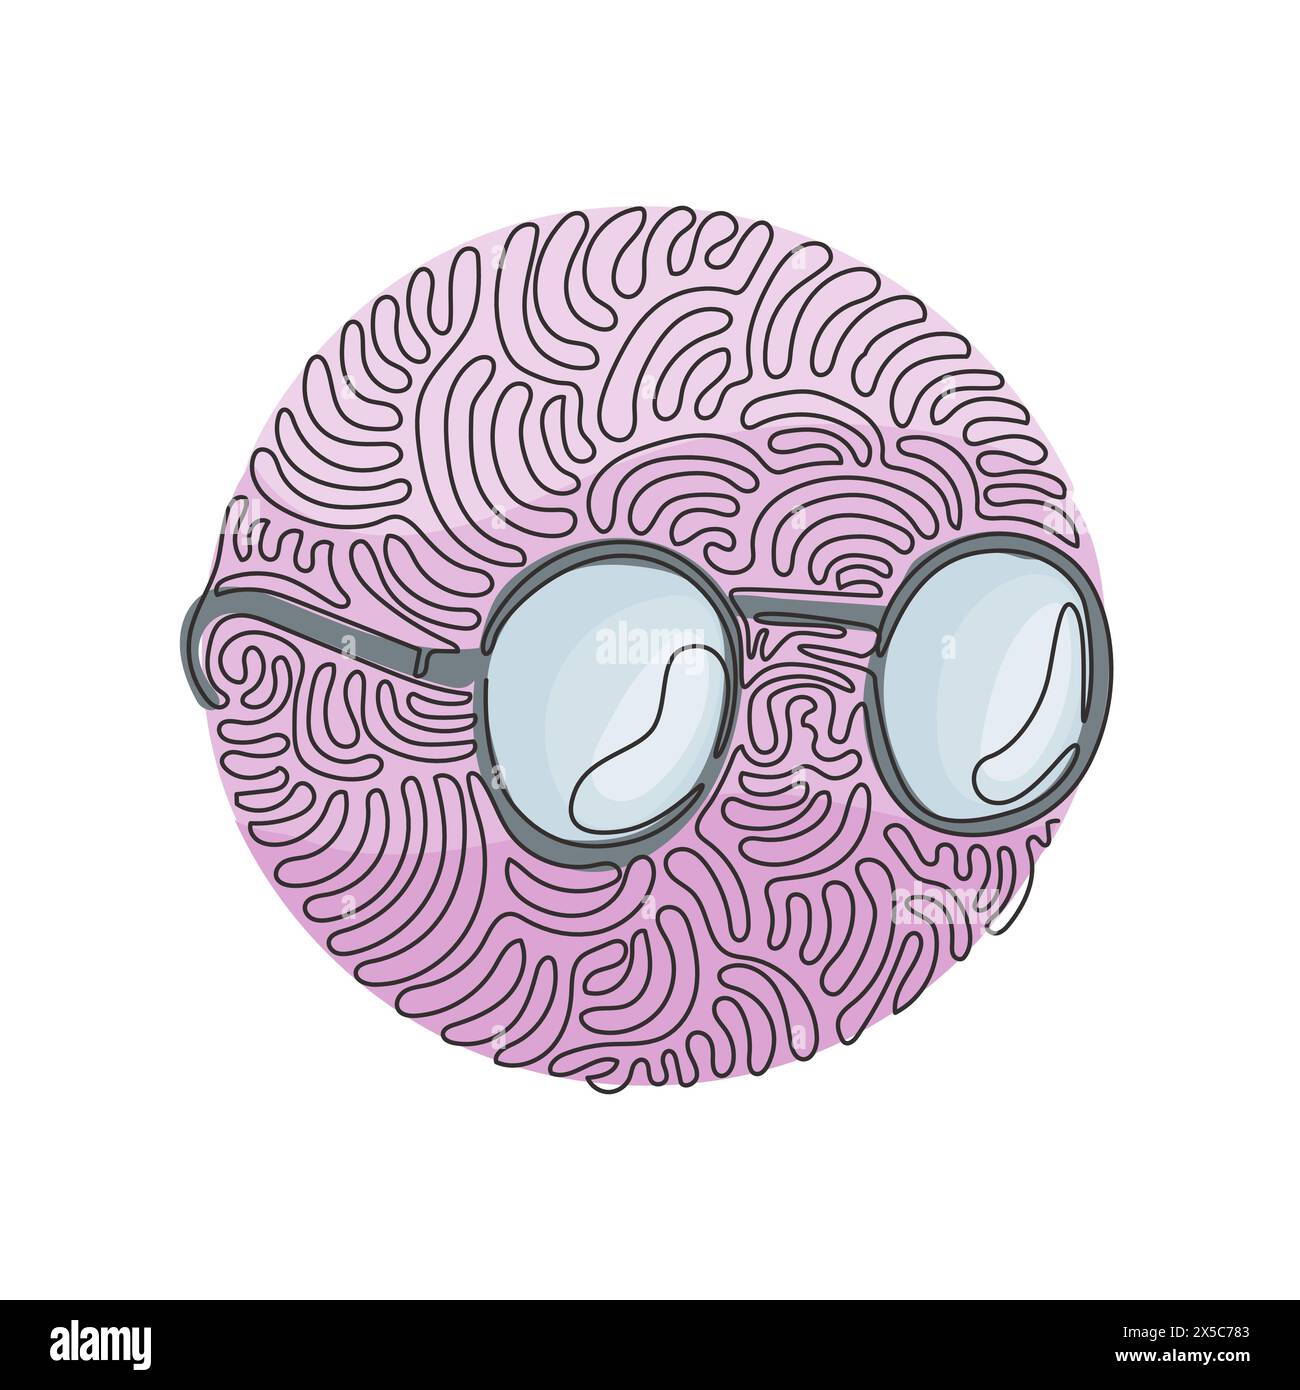 Single one line drawing Round black-rimmed glasses. Side of myopia glasses, round frame, with black glasses legs. Swirl curl circle background style. Stock Vector